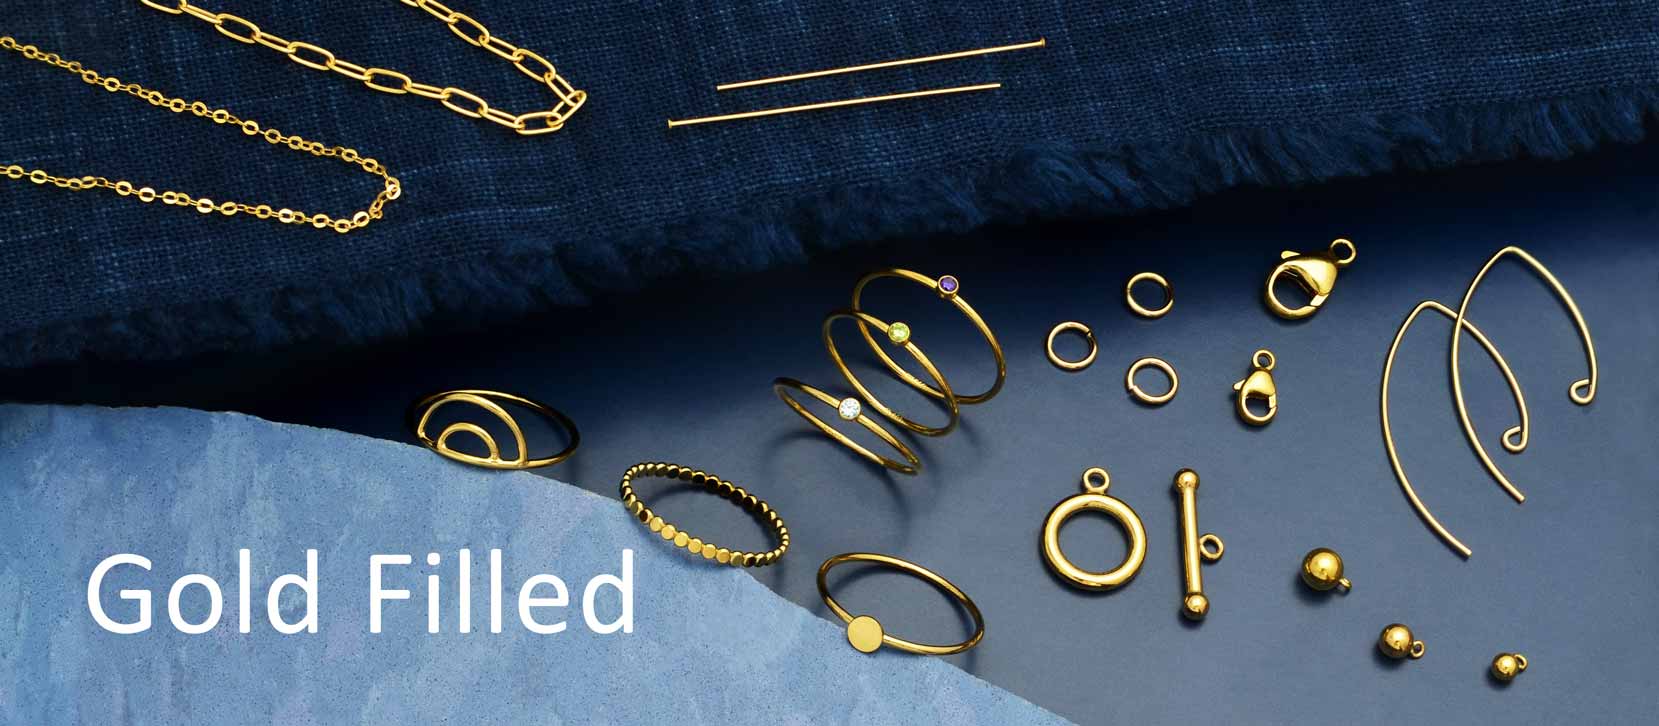 Shop Gold Filled Jewelry Components